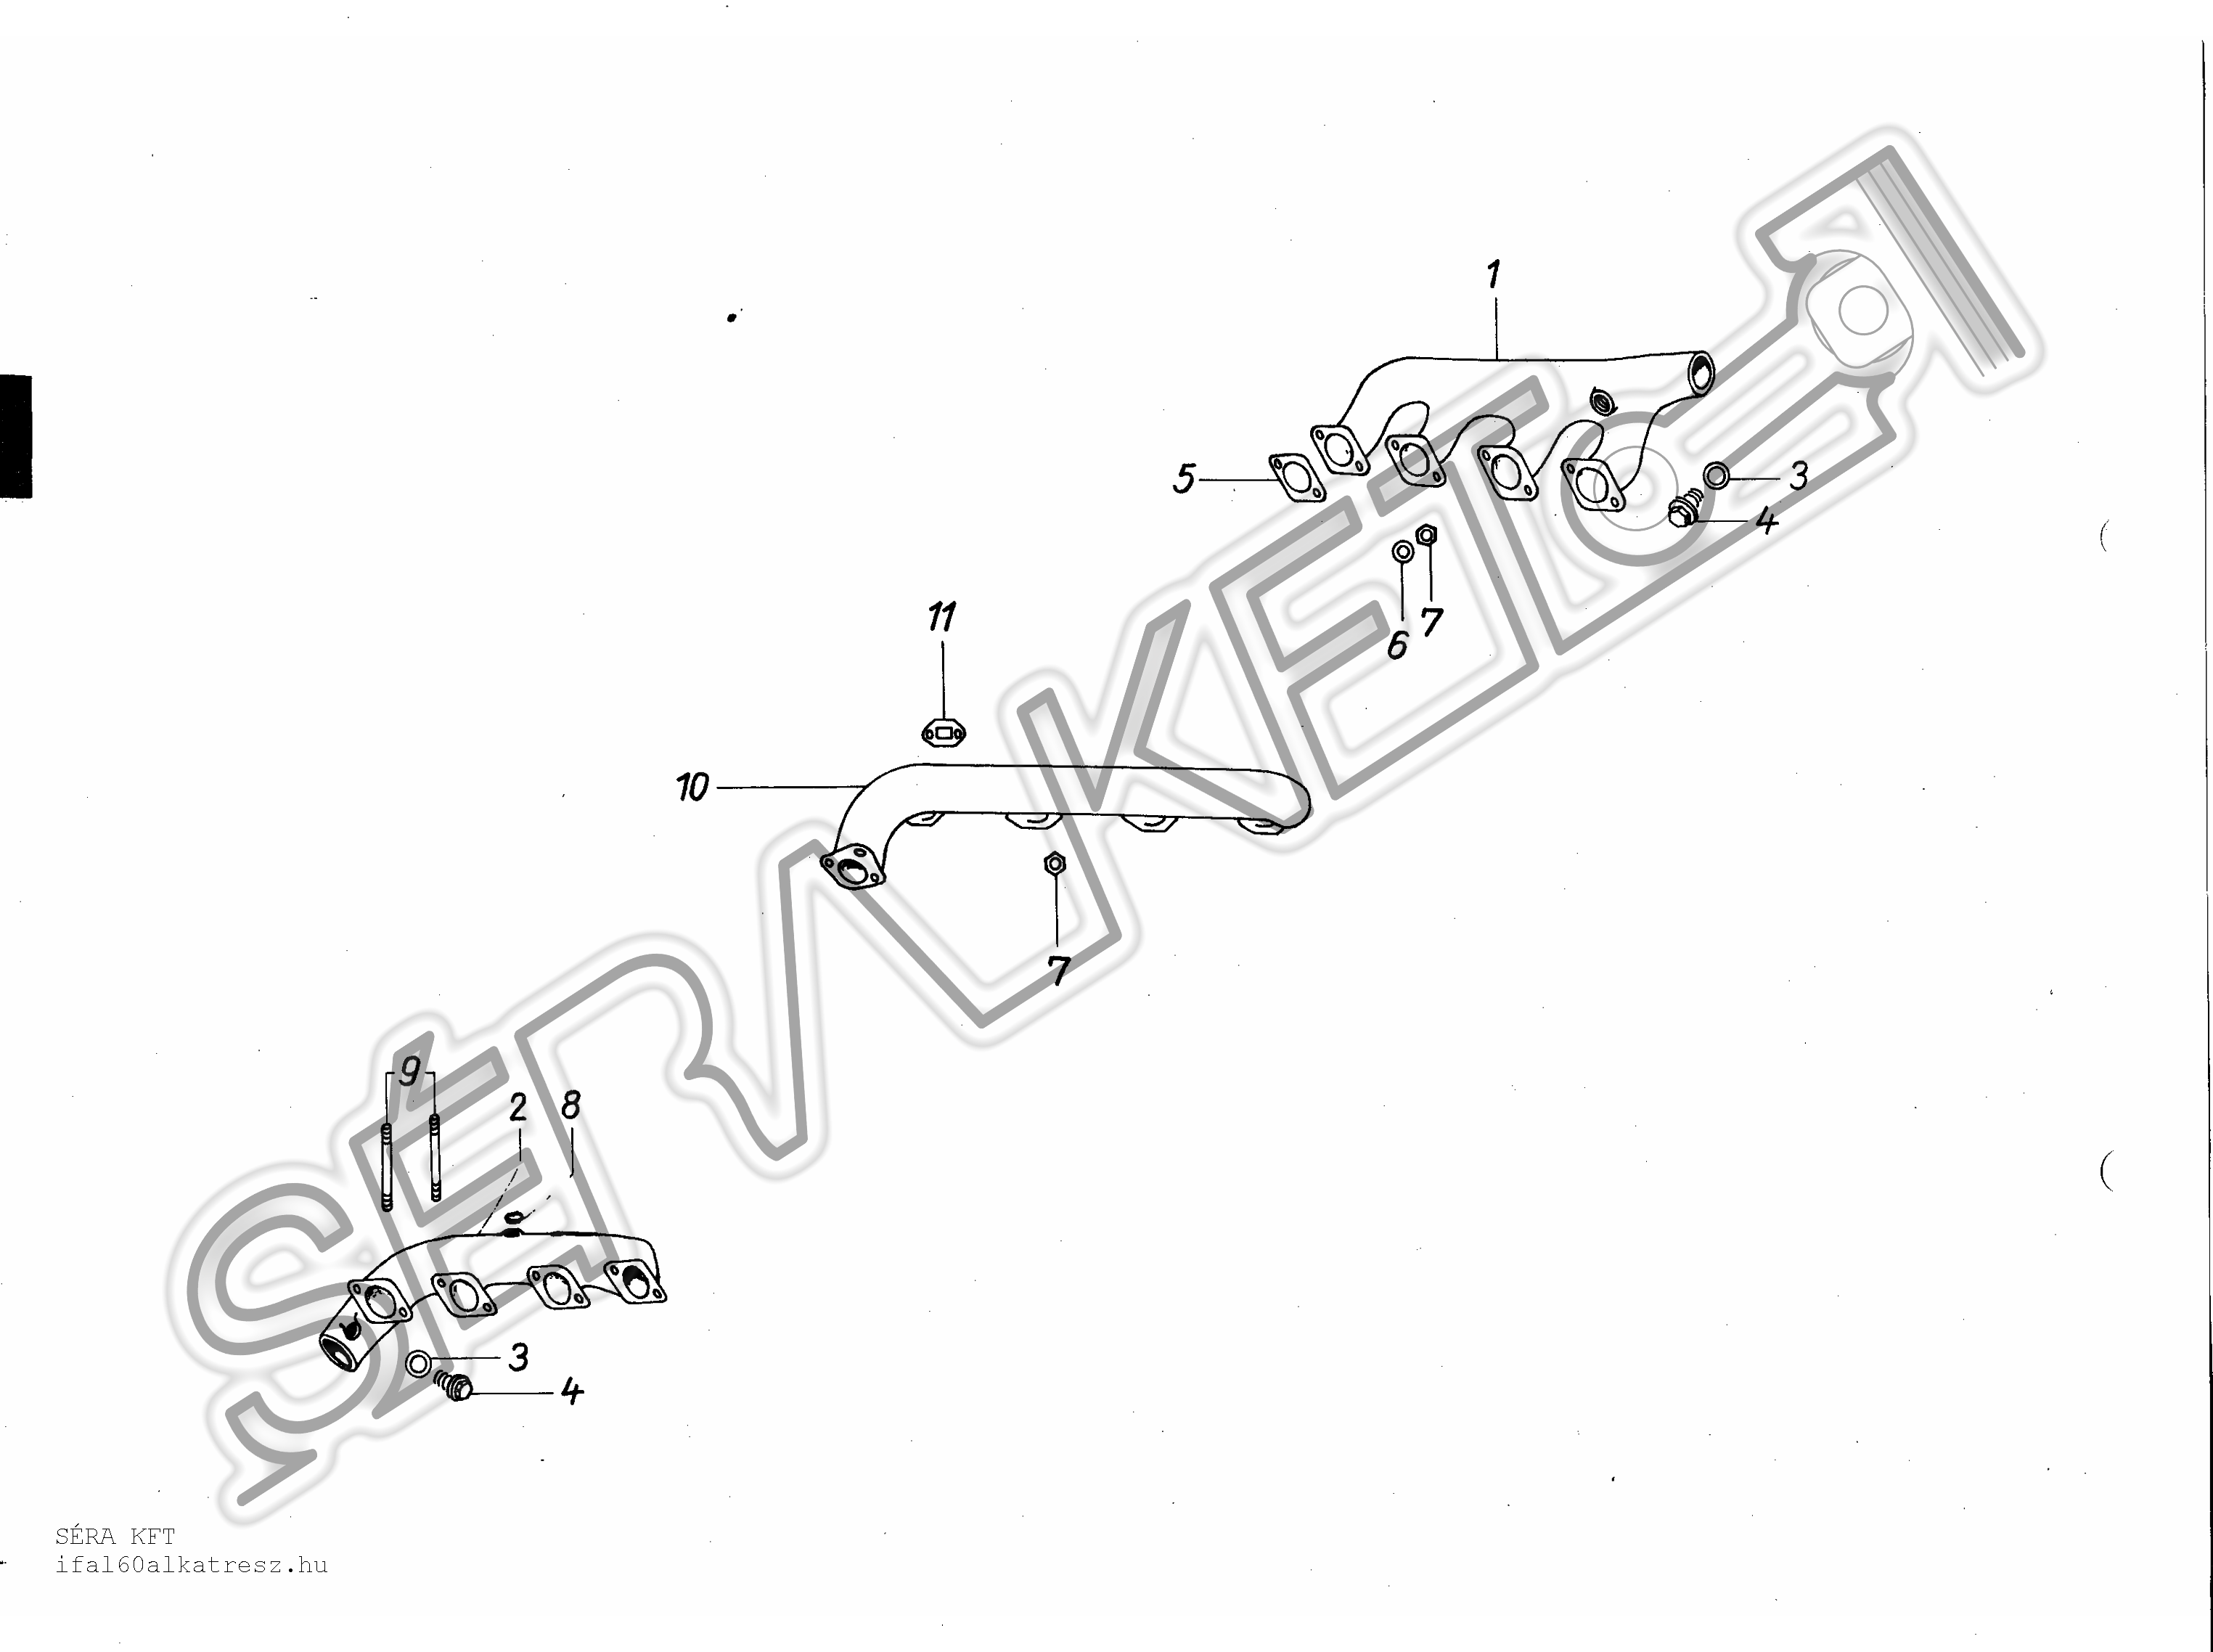 Induction and exhaust system